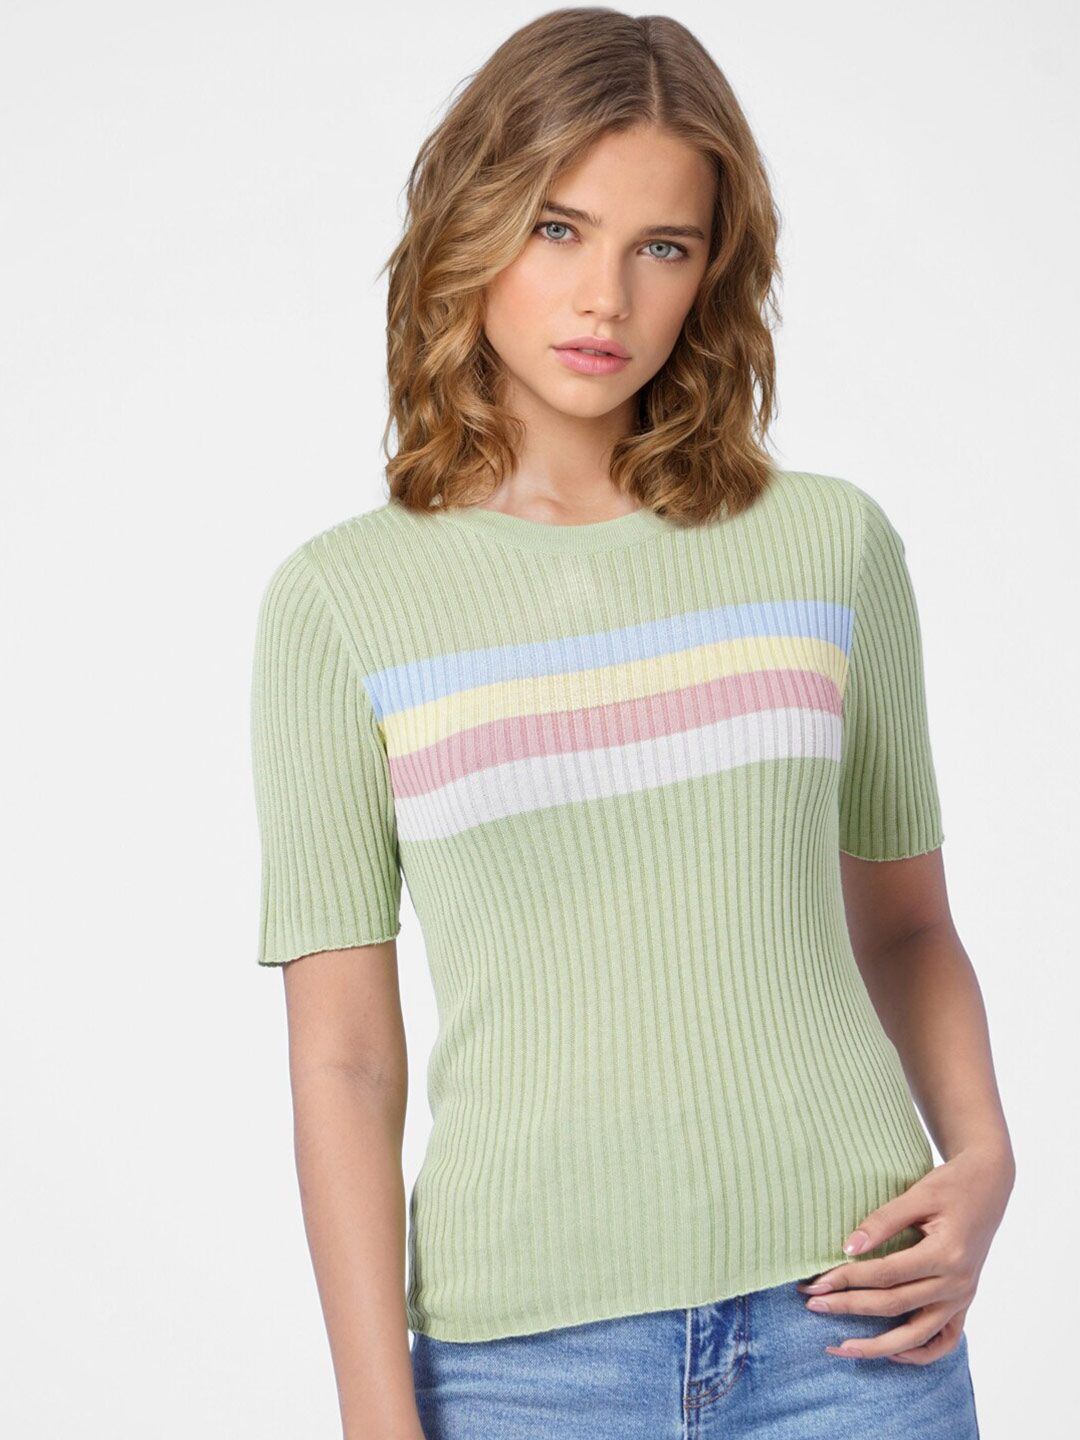 ONLY Women Green Striped Top Price in India